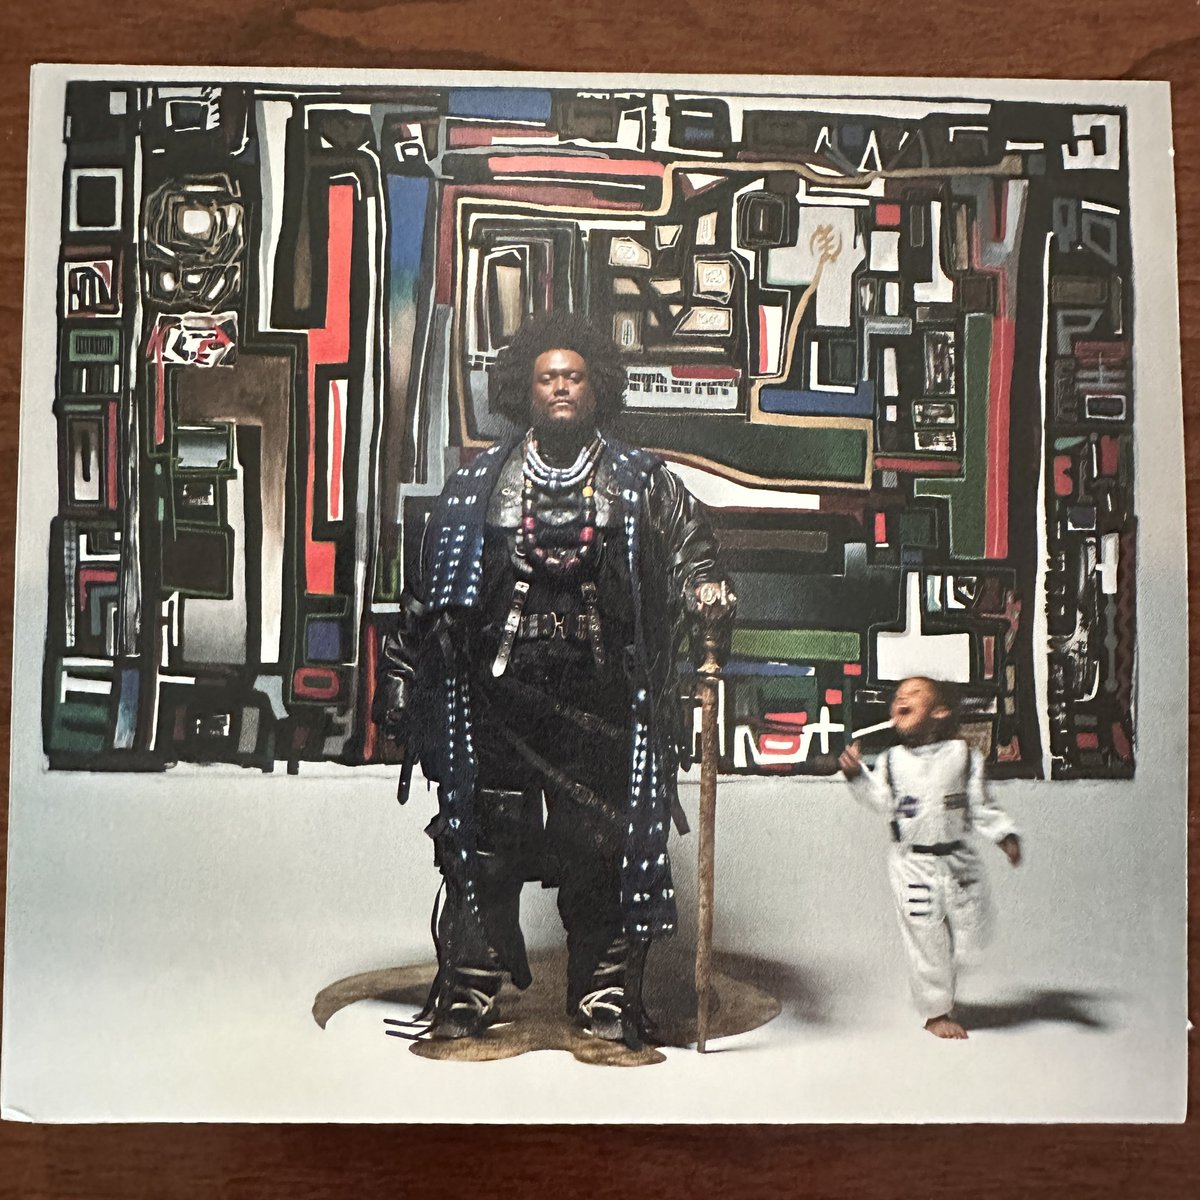 An album always hits differently when you see it performed live before you really get to know it. Seeing @KamasiW and crew this week was a special experience, and it’s deepened my appreciation for this beautiful album.